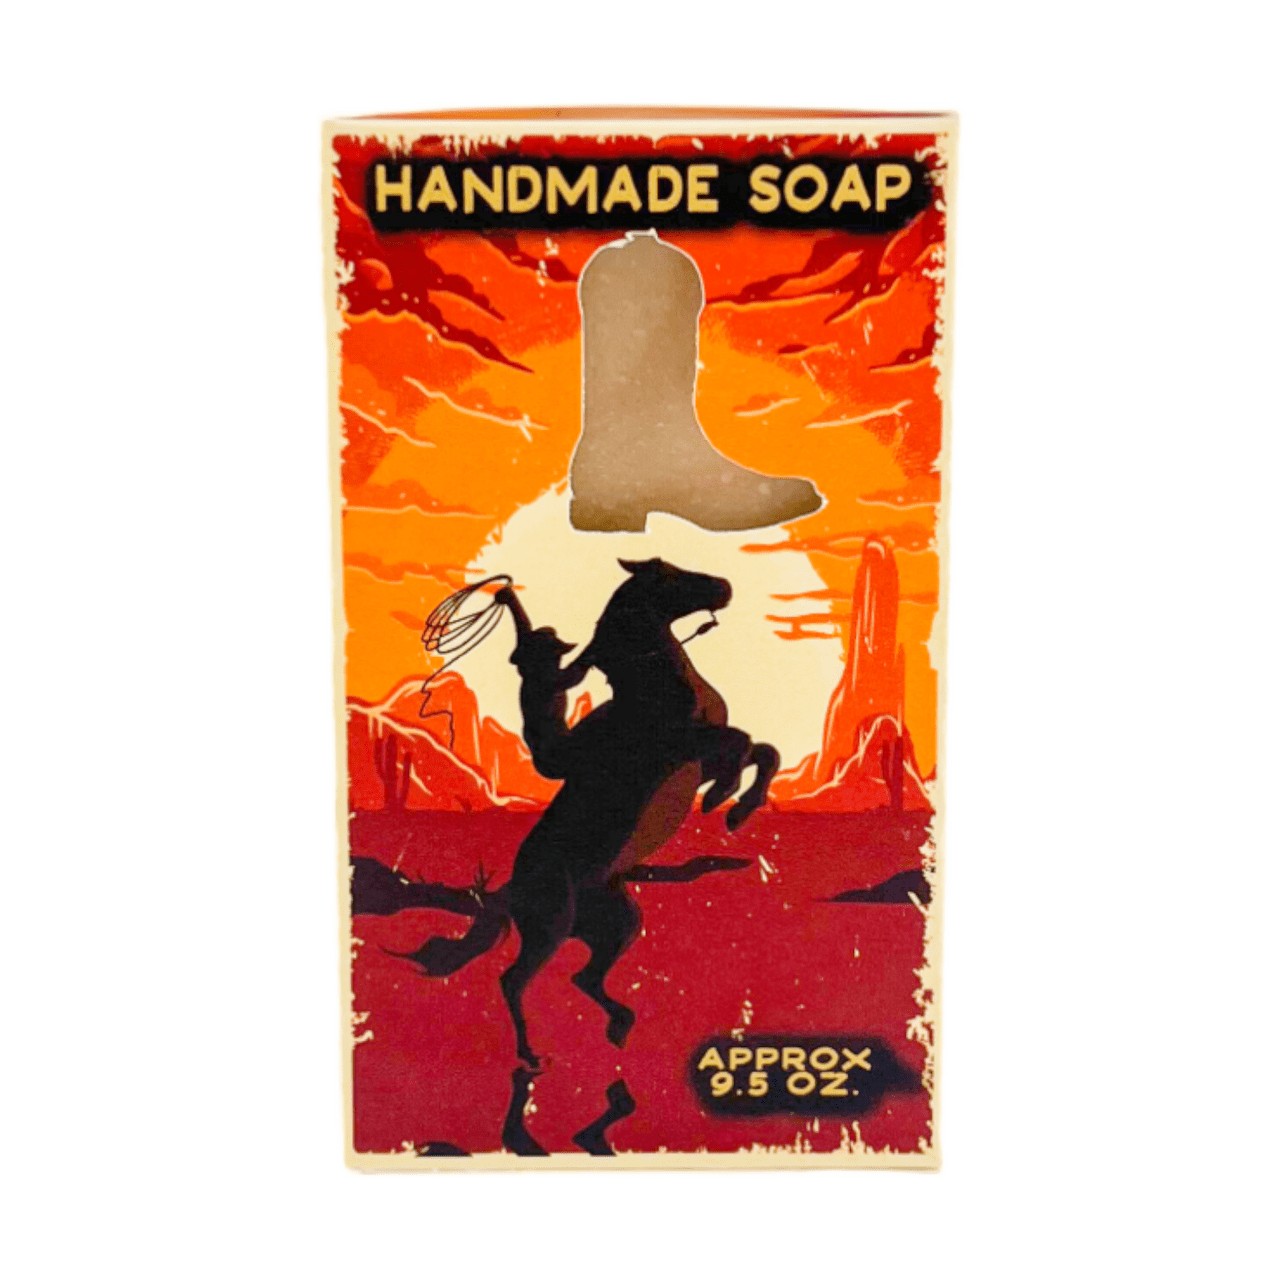 The Cowboy - Big Bar Soap - Old Town Soap Co.